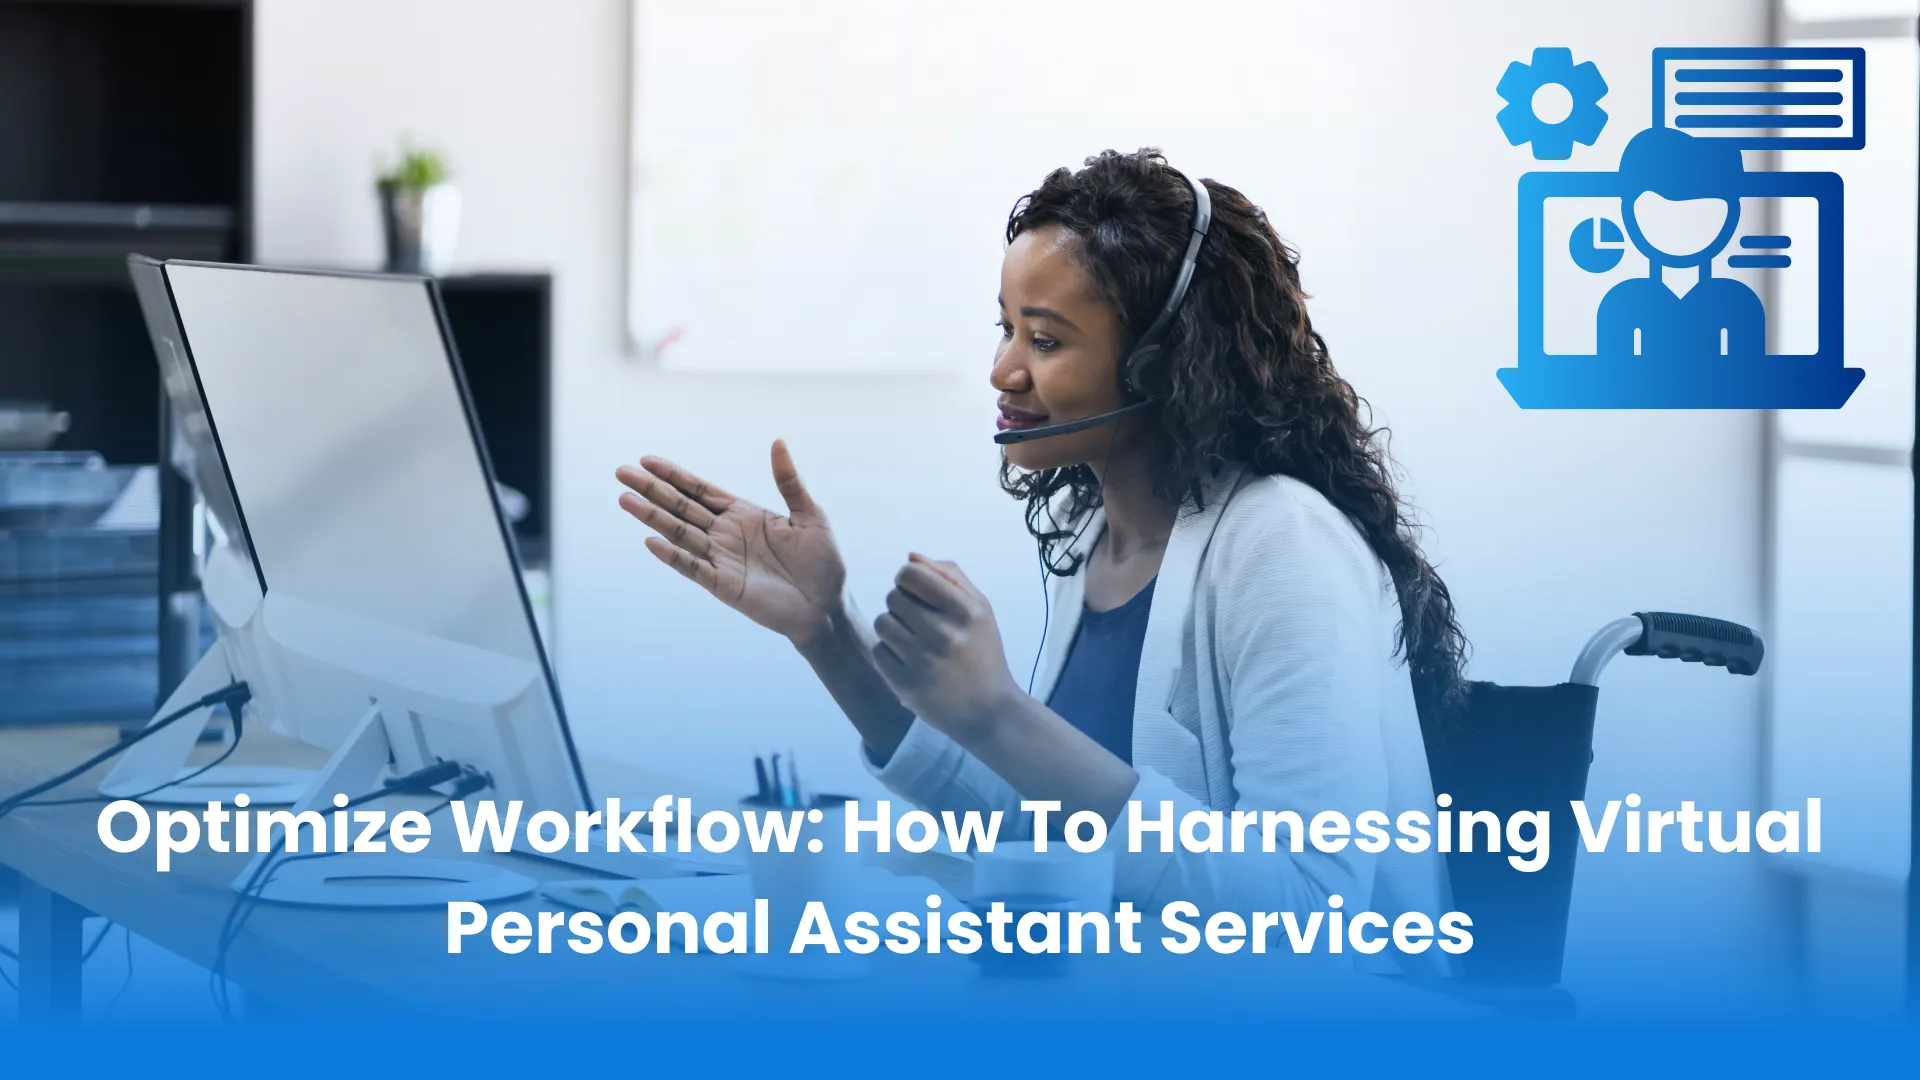 Optimize Workflow: How To Harnessing Virtual Personal Assistant Services